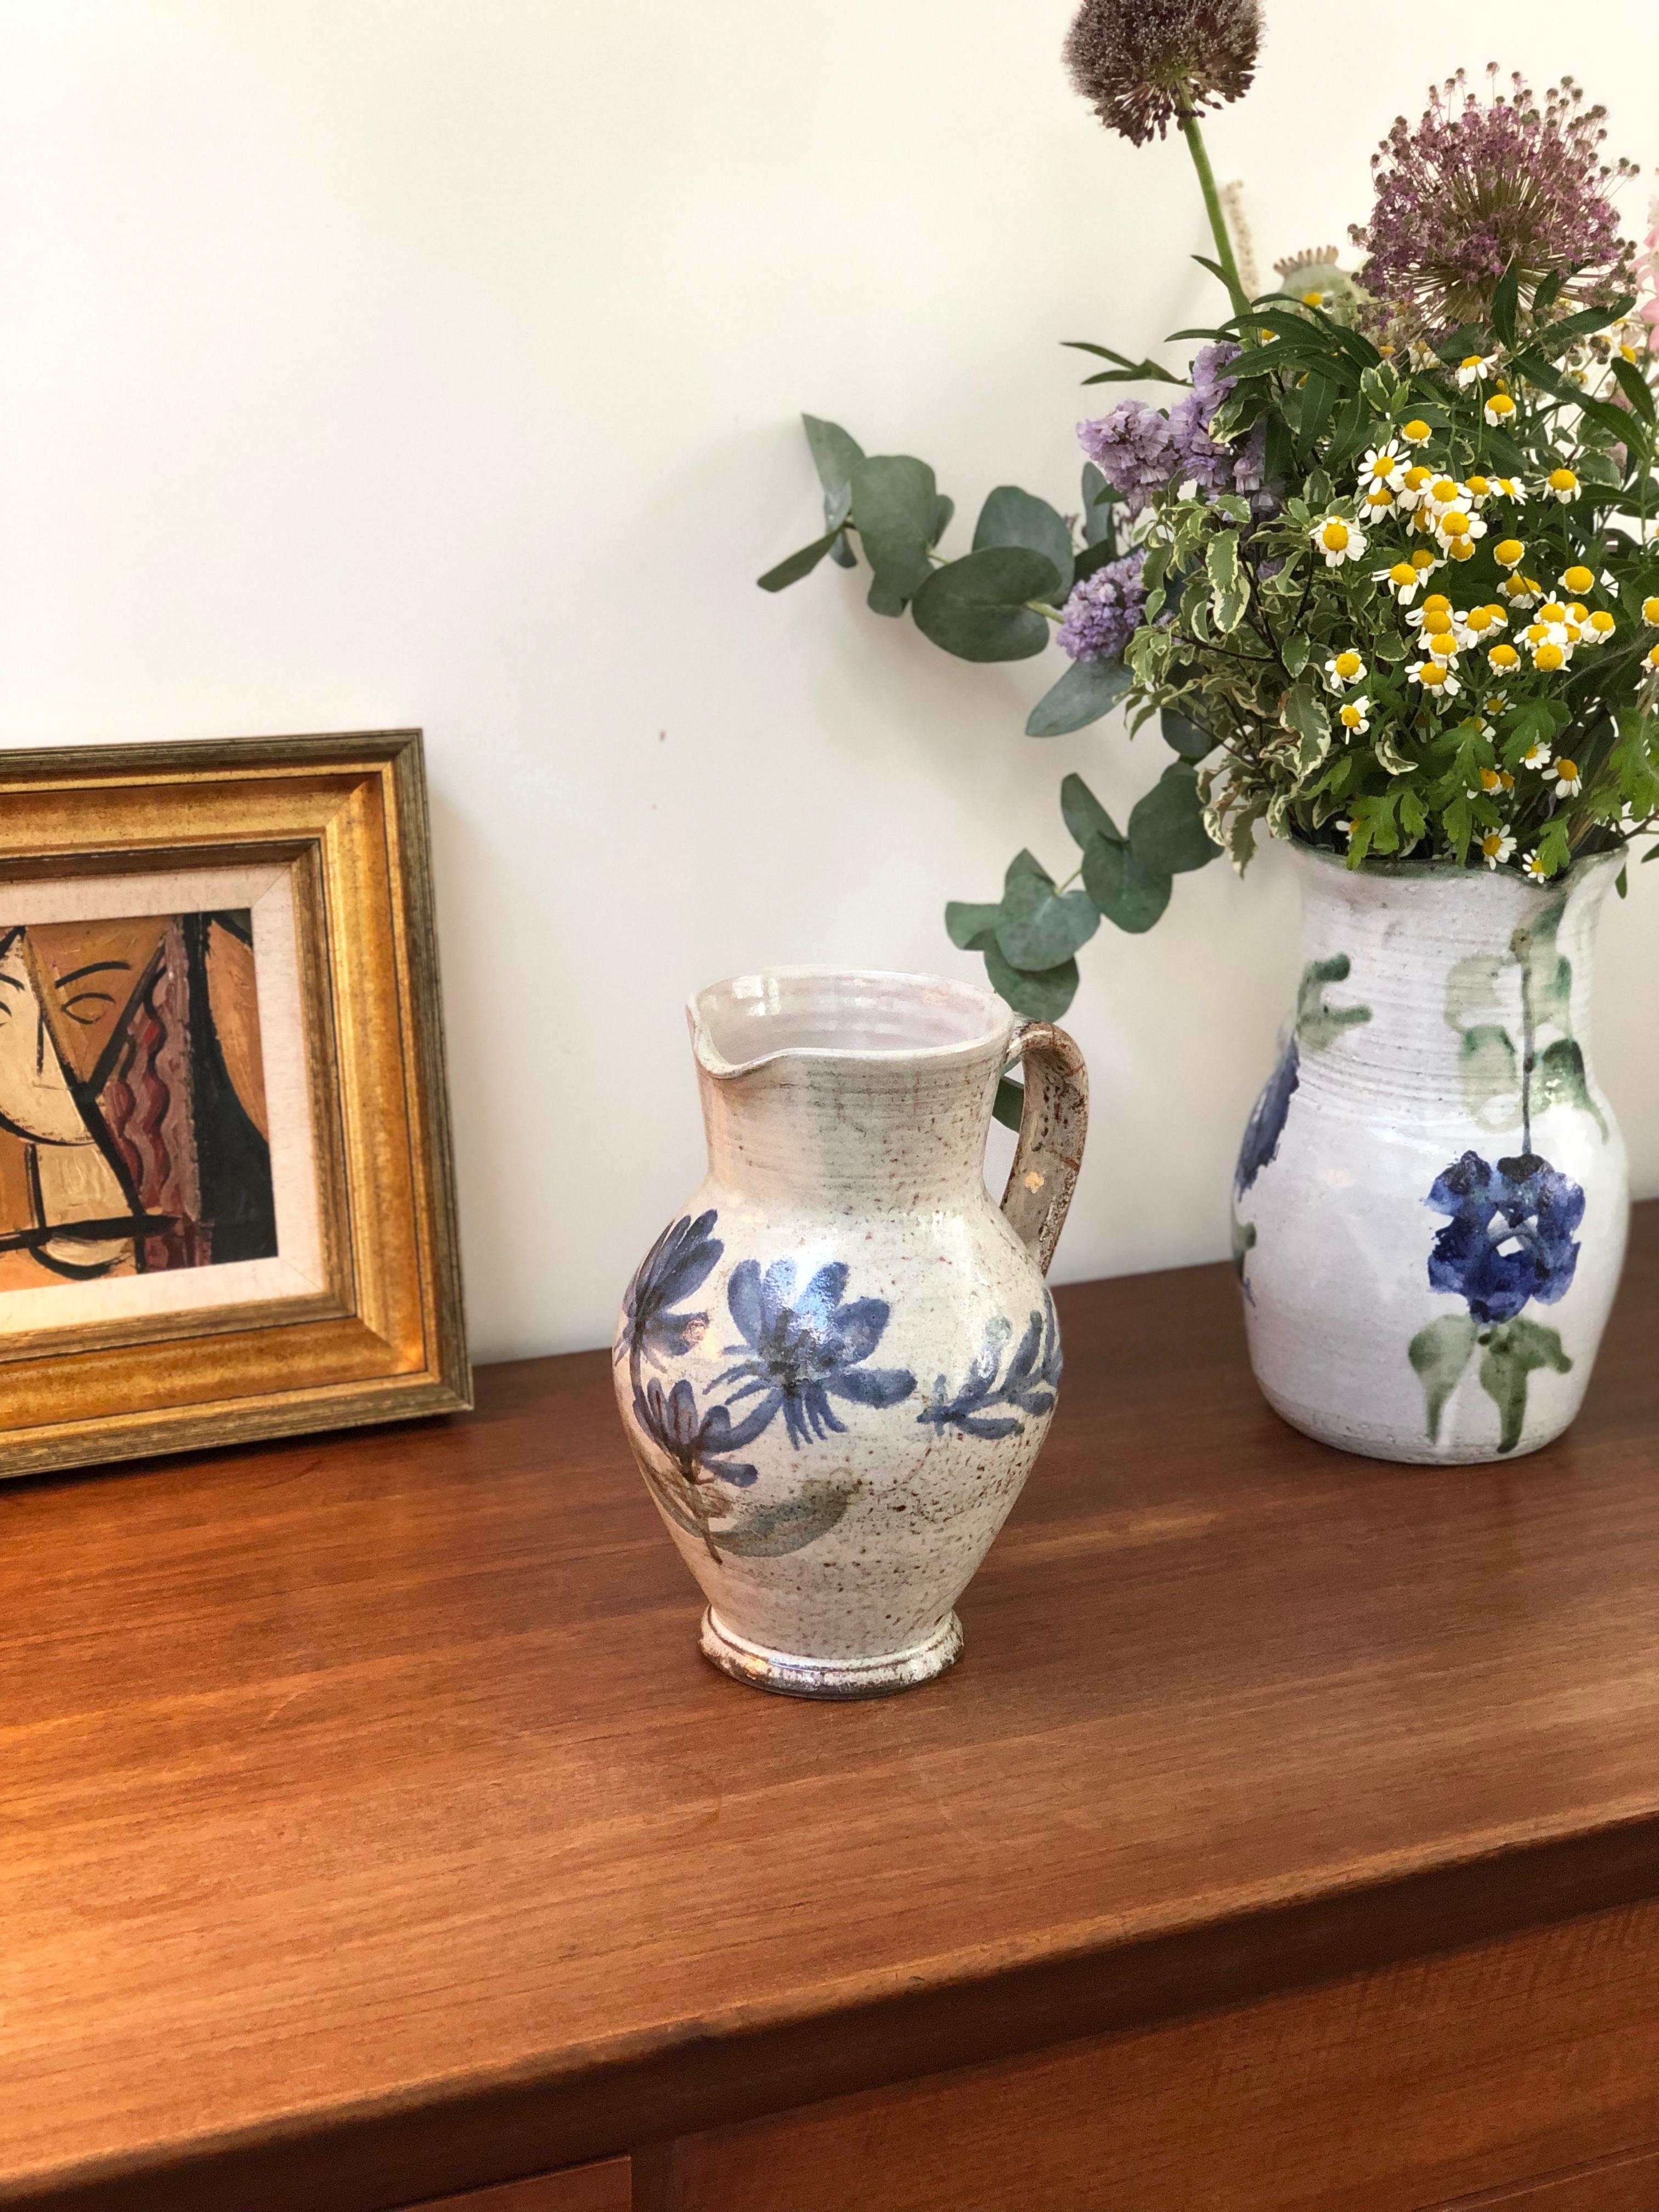 Vintage ceramic pitcher / vase by Gustave Reynaud, Le Mûrier, circa 1950s. This utilitarian pitcher is also a delightful work of art doubling as a beautiful vase. On the rustic exterior you will find lovely flowers with blue petals under the spout